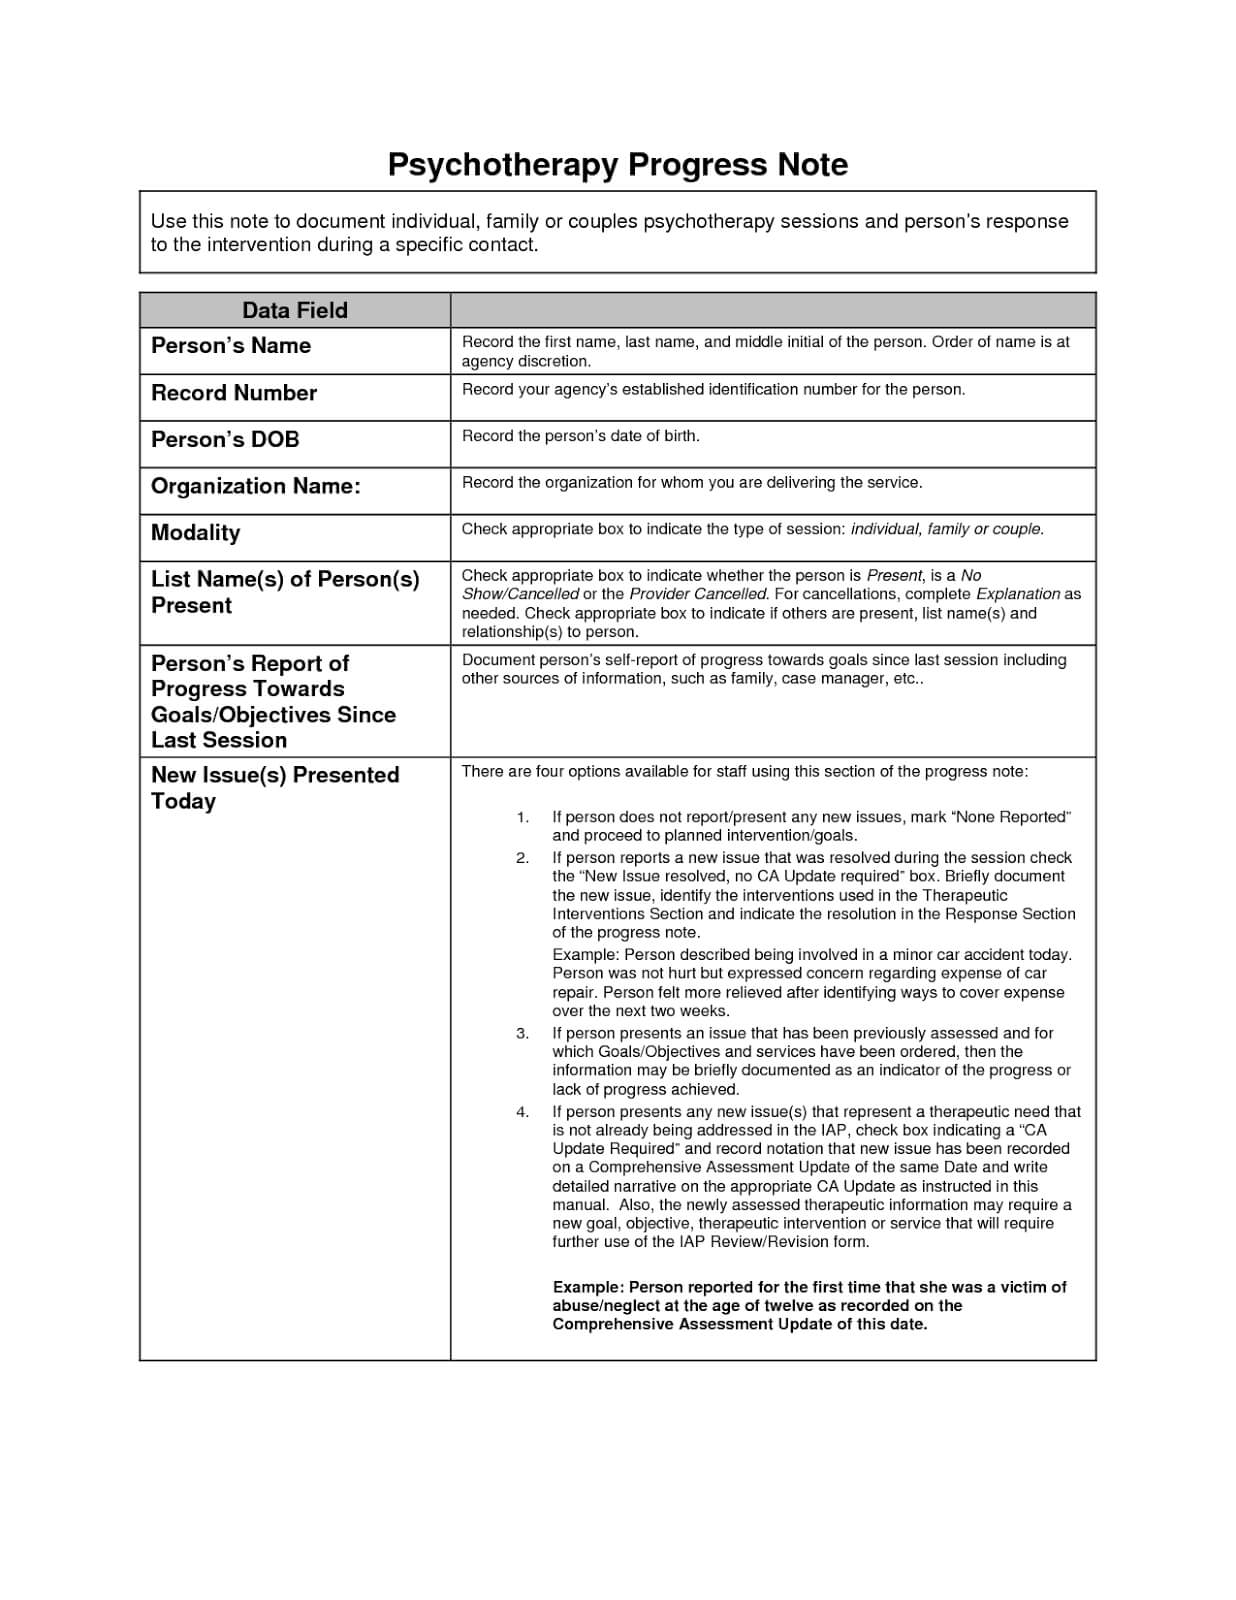 Psychotherapy Progress Note Template Is Used With School Psychologist Report Template